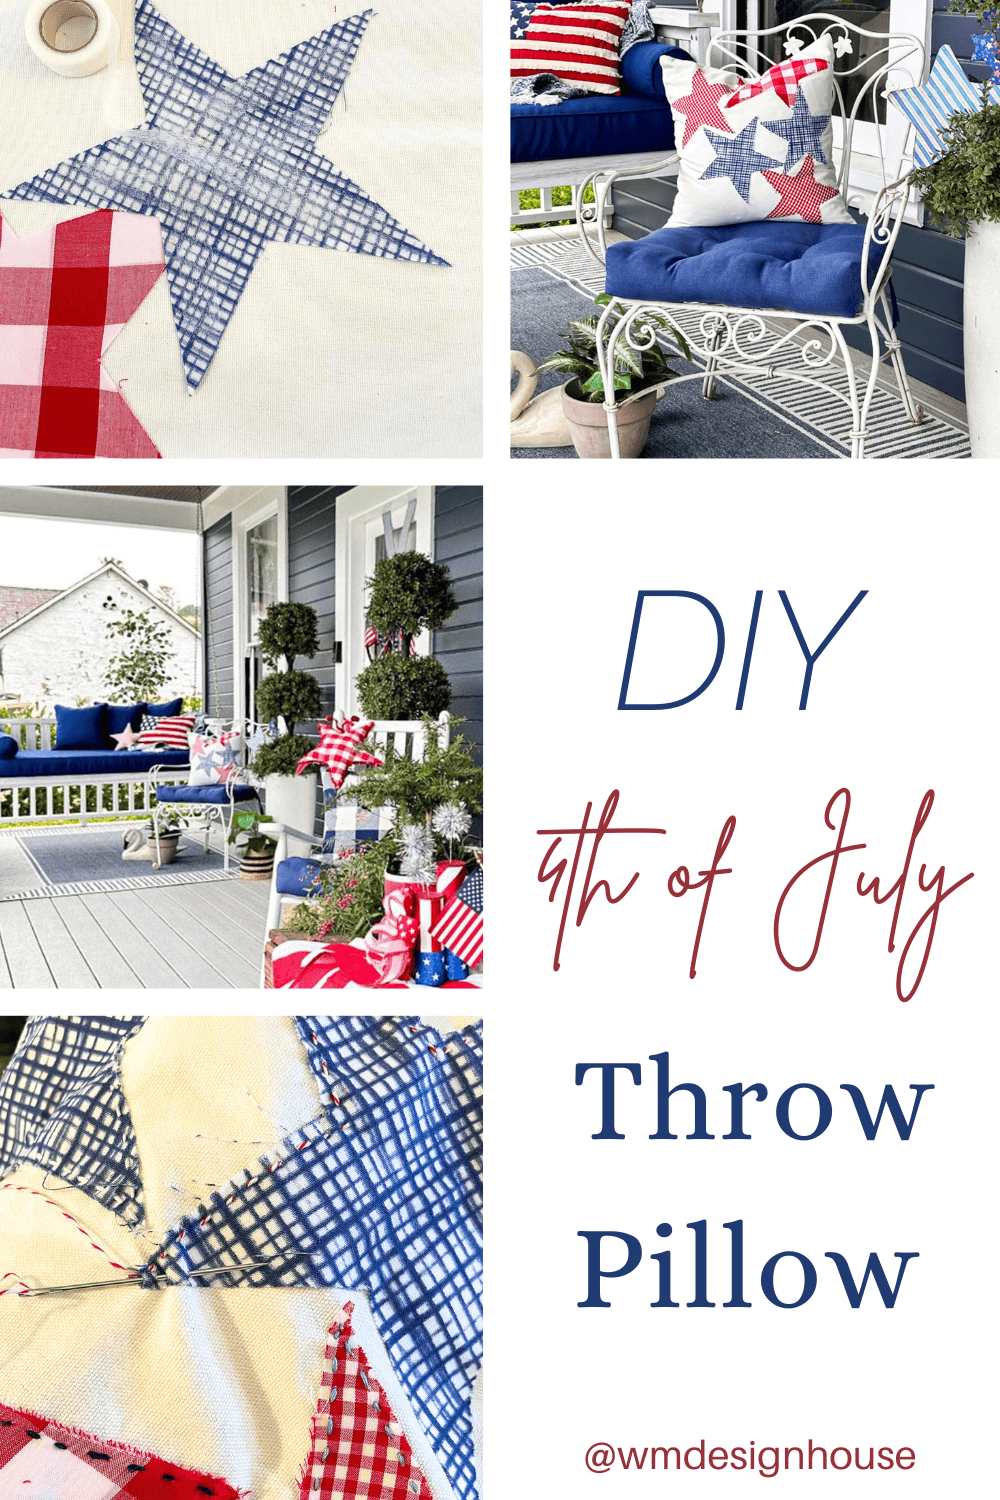 How to Make a DIY Throw Pillow for the Fourth of July